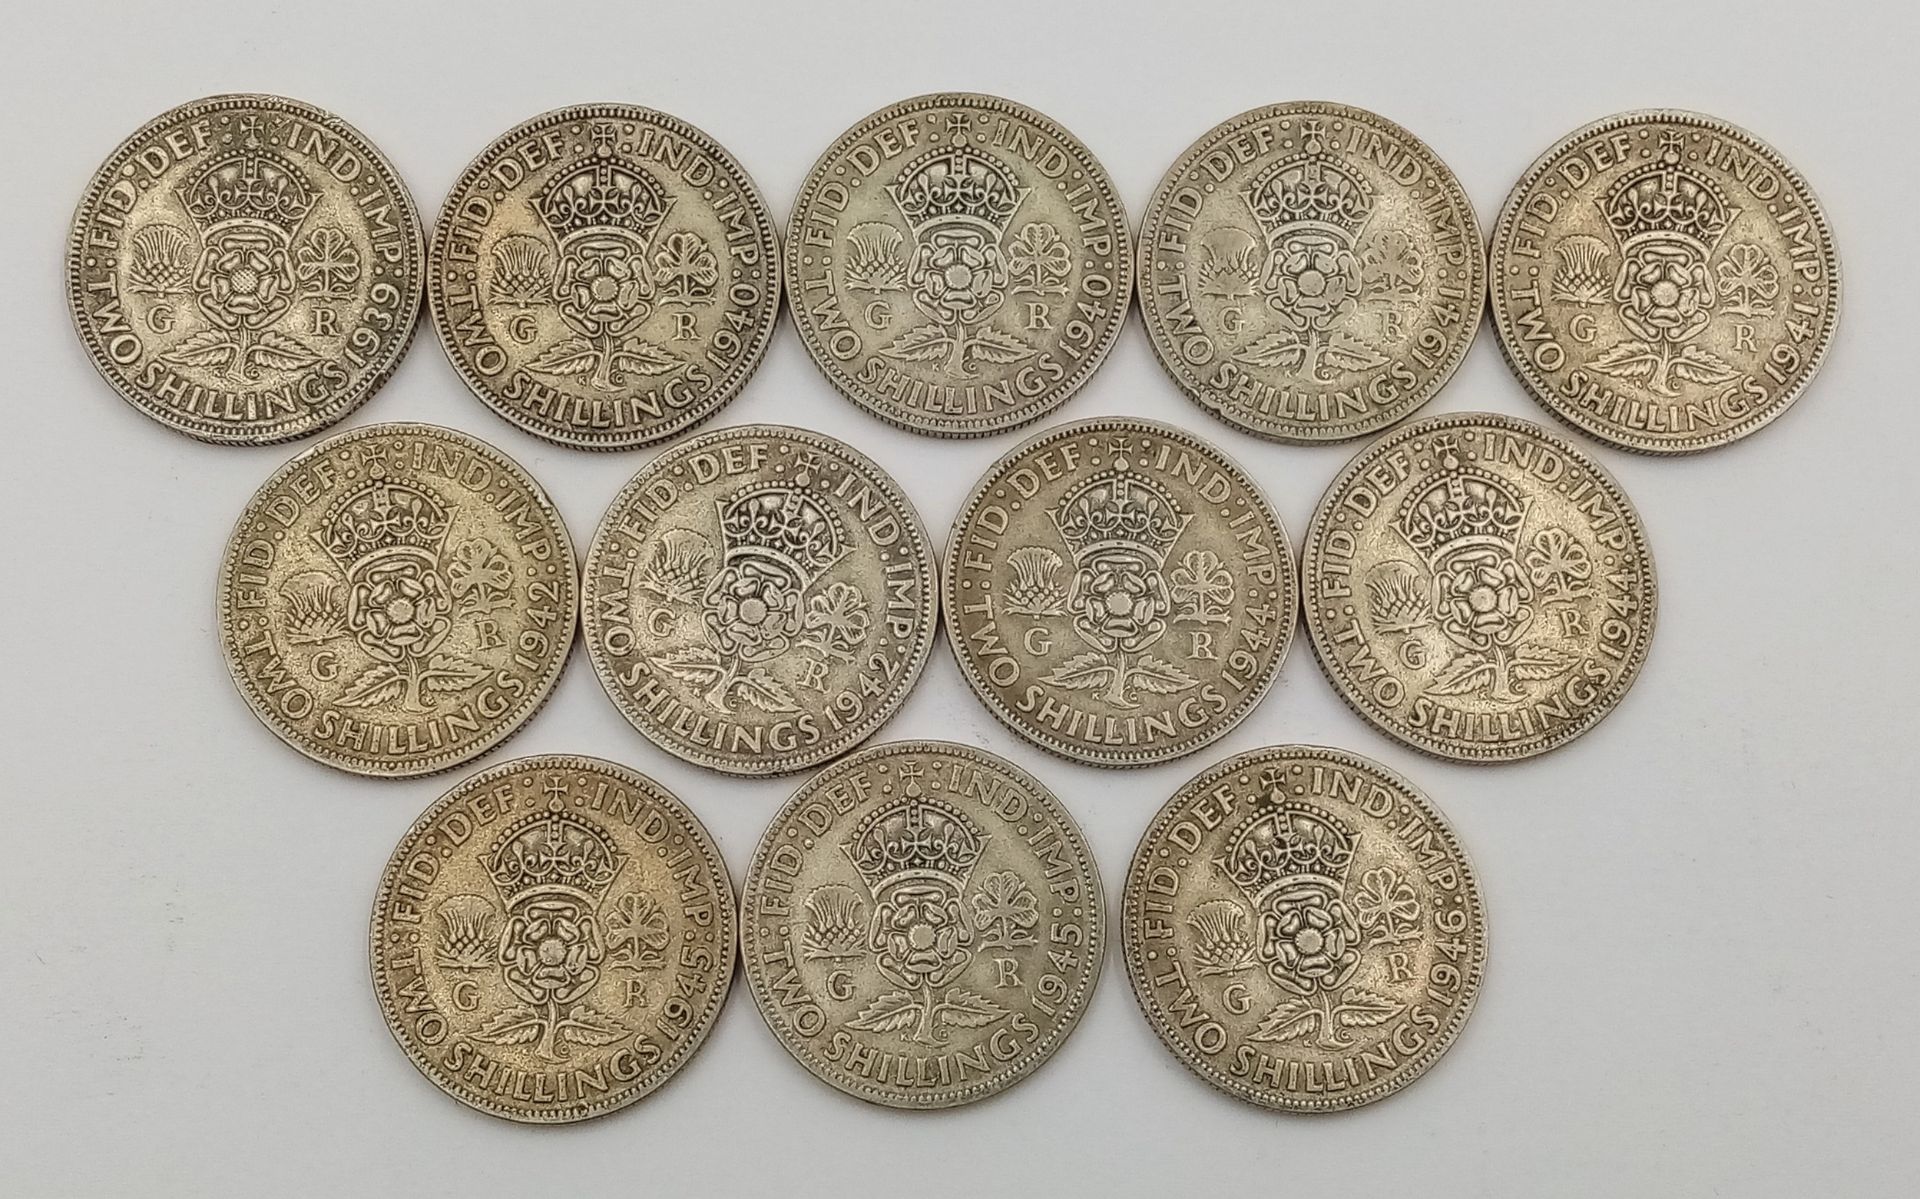 A Parcel of Twelve Pre-1947 Silver Two Shilling (Florin) Coins. Dates: 1 x 1939, 2 x 1940, 2 x 1941, - Image 2 of 2